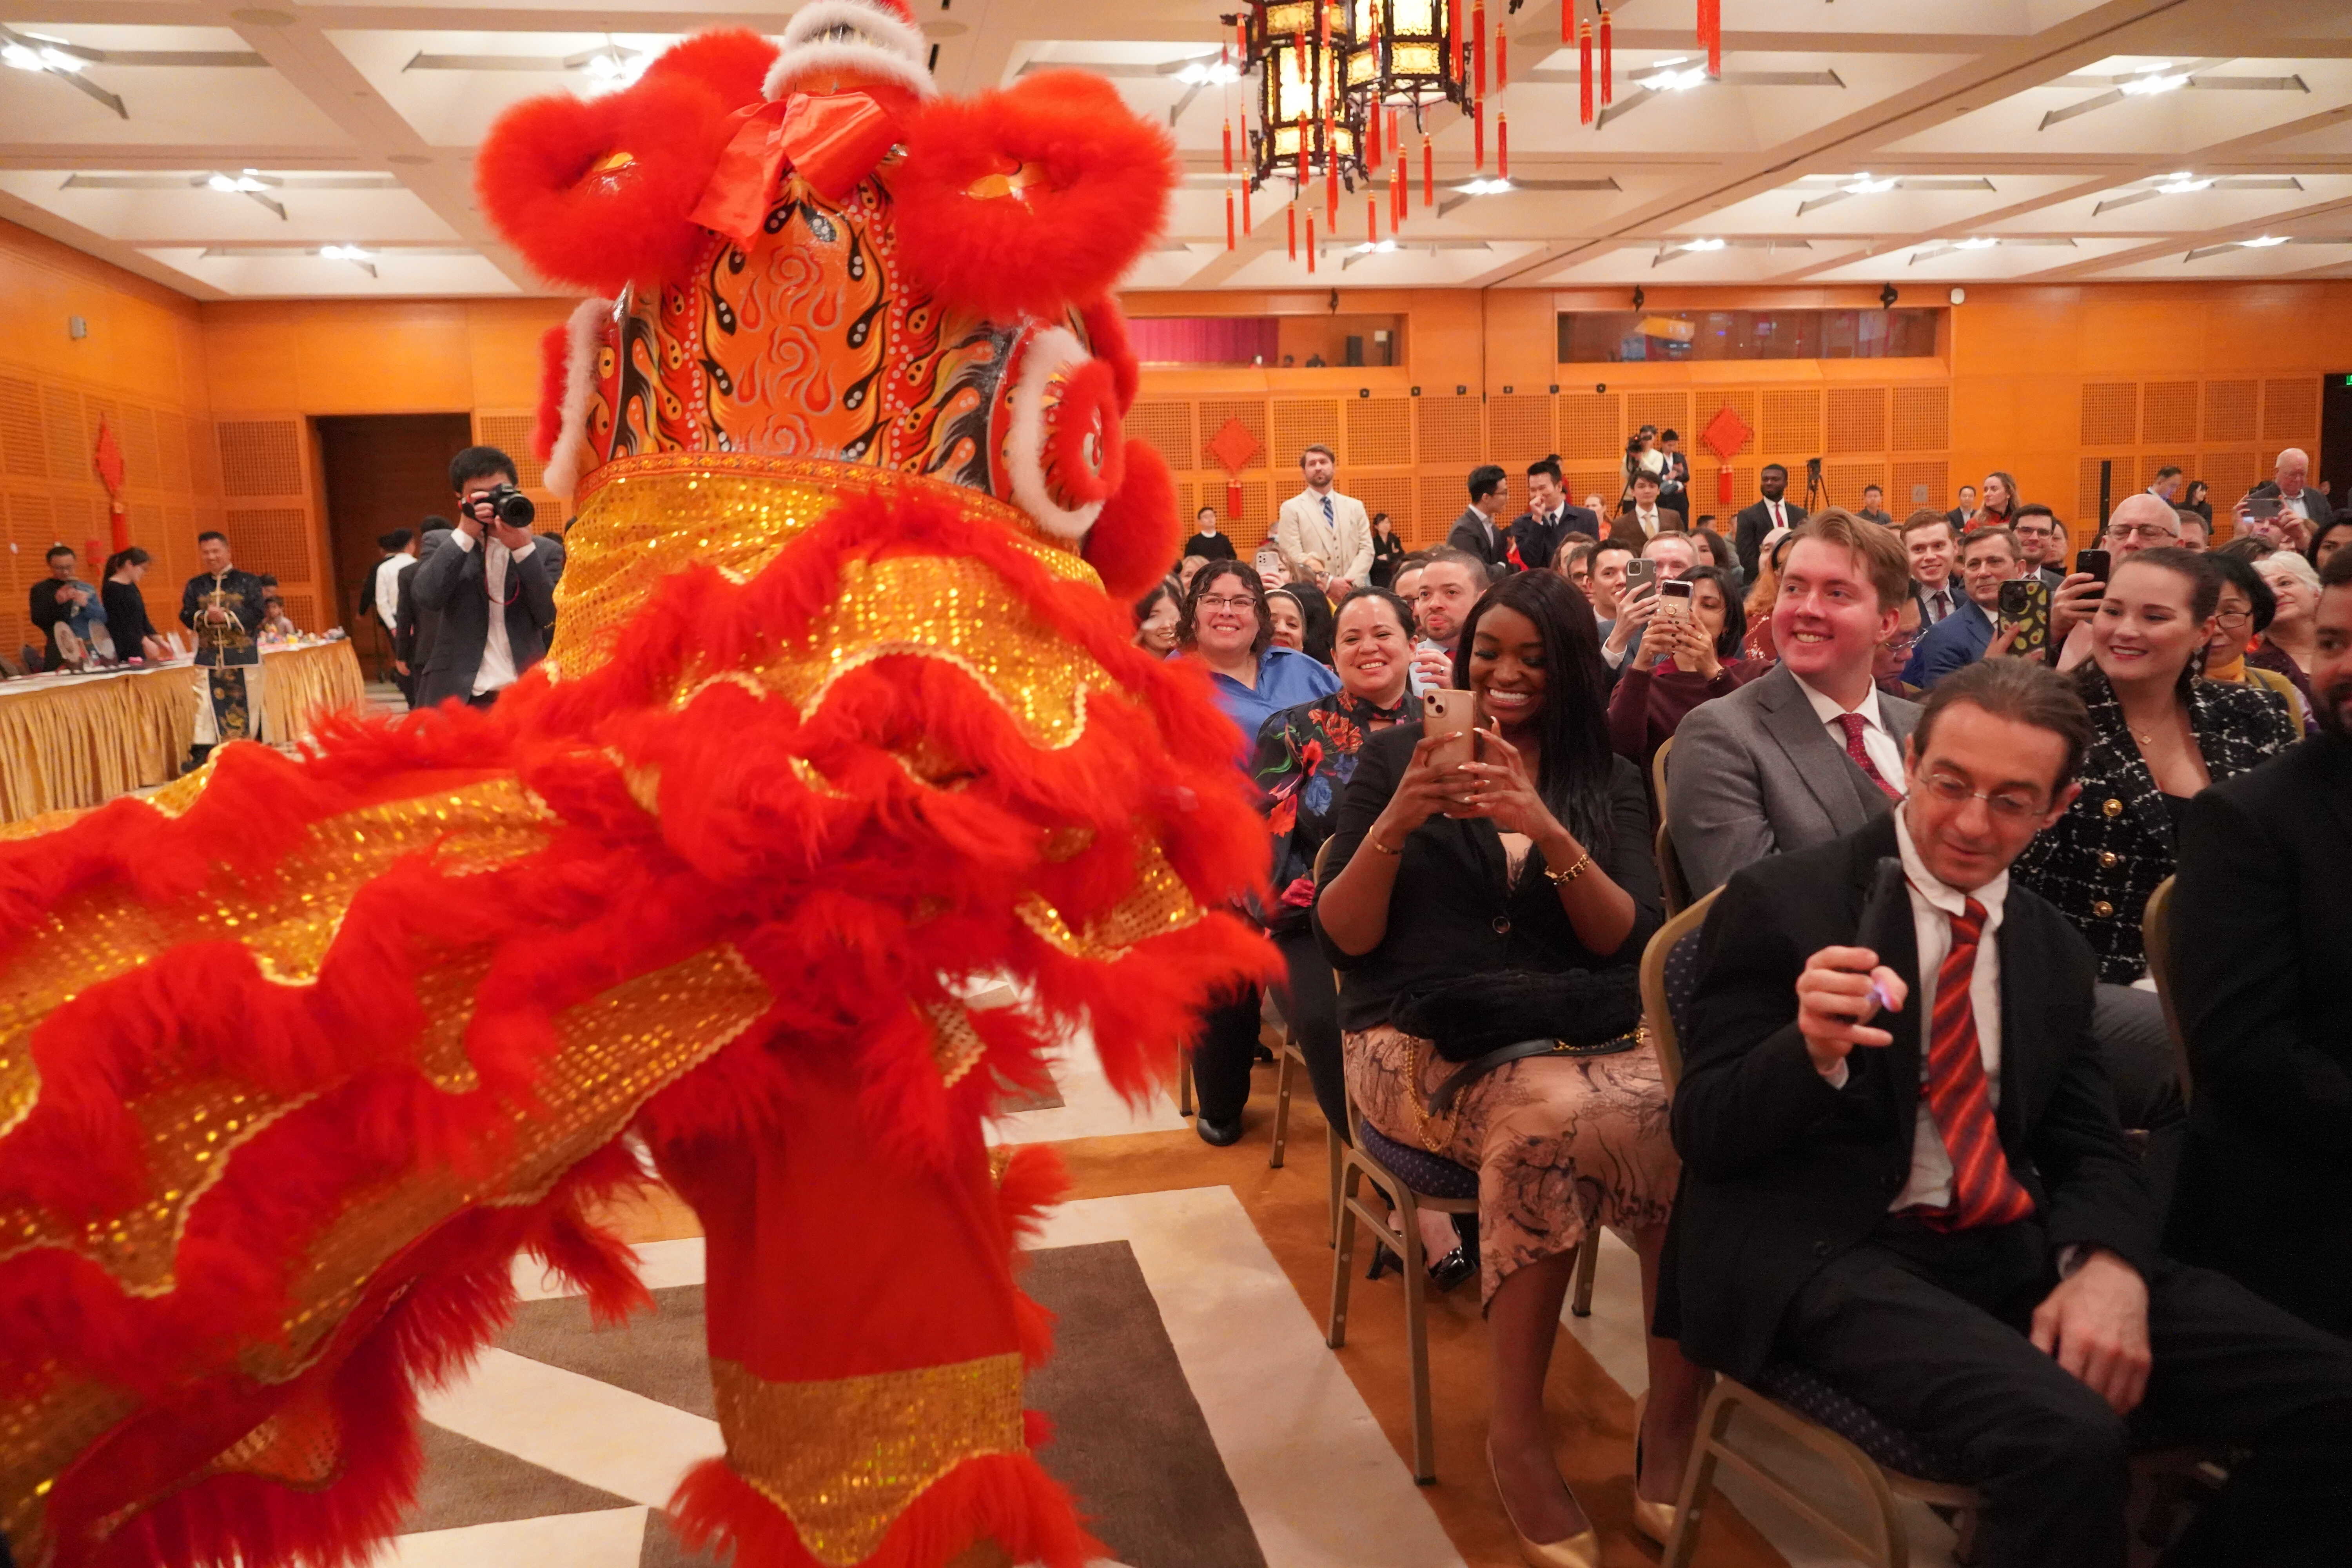 Chinese Embassy in the U.S. Hosts“Evening at the Chinese Embassy – Year of the Dragon Celebration” Cultural Event